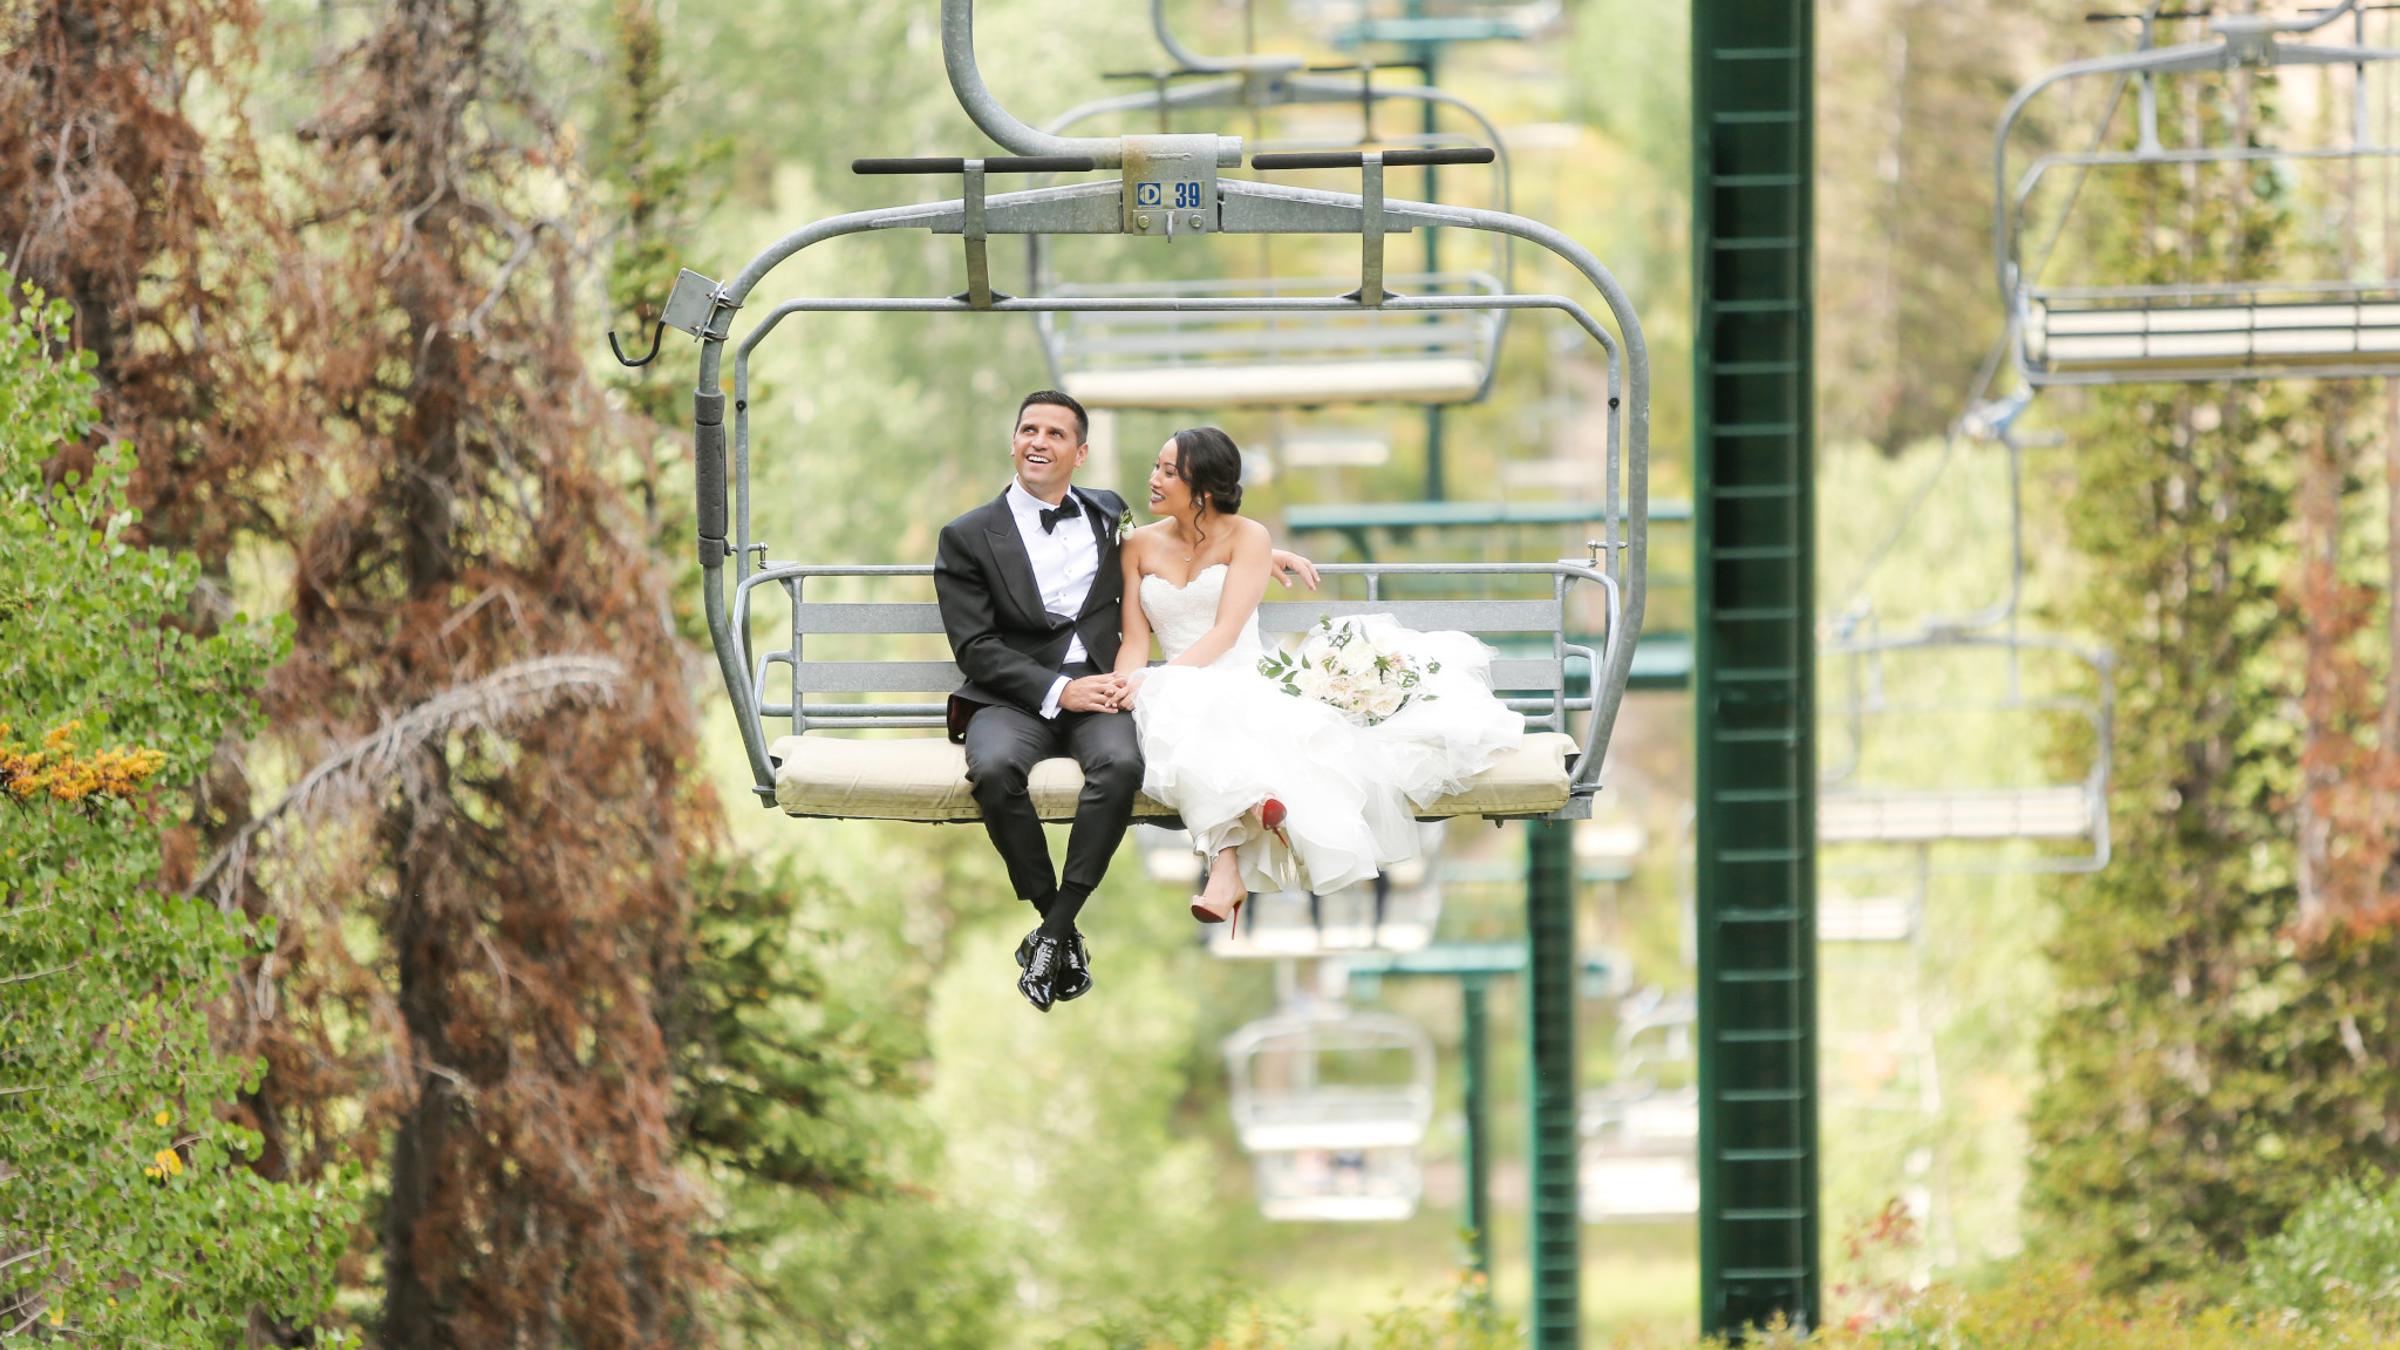 A bride and groom riding up a chairlift together at Deer Valley Resort